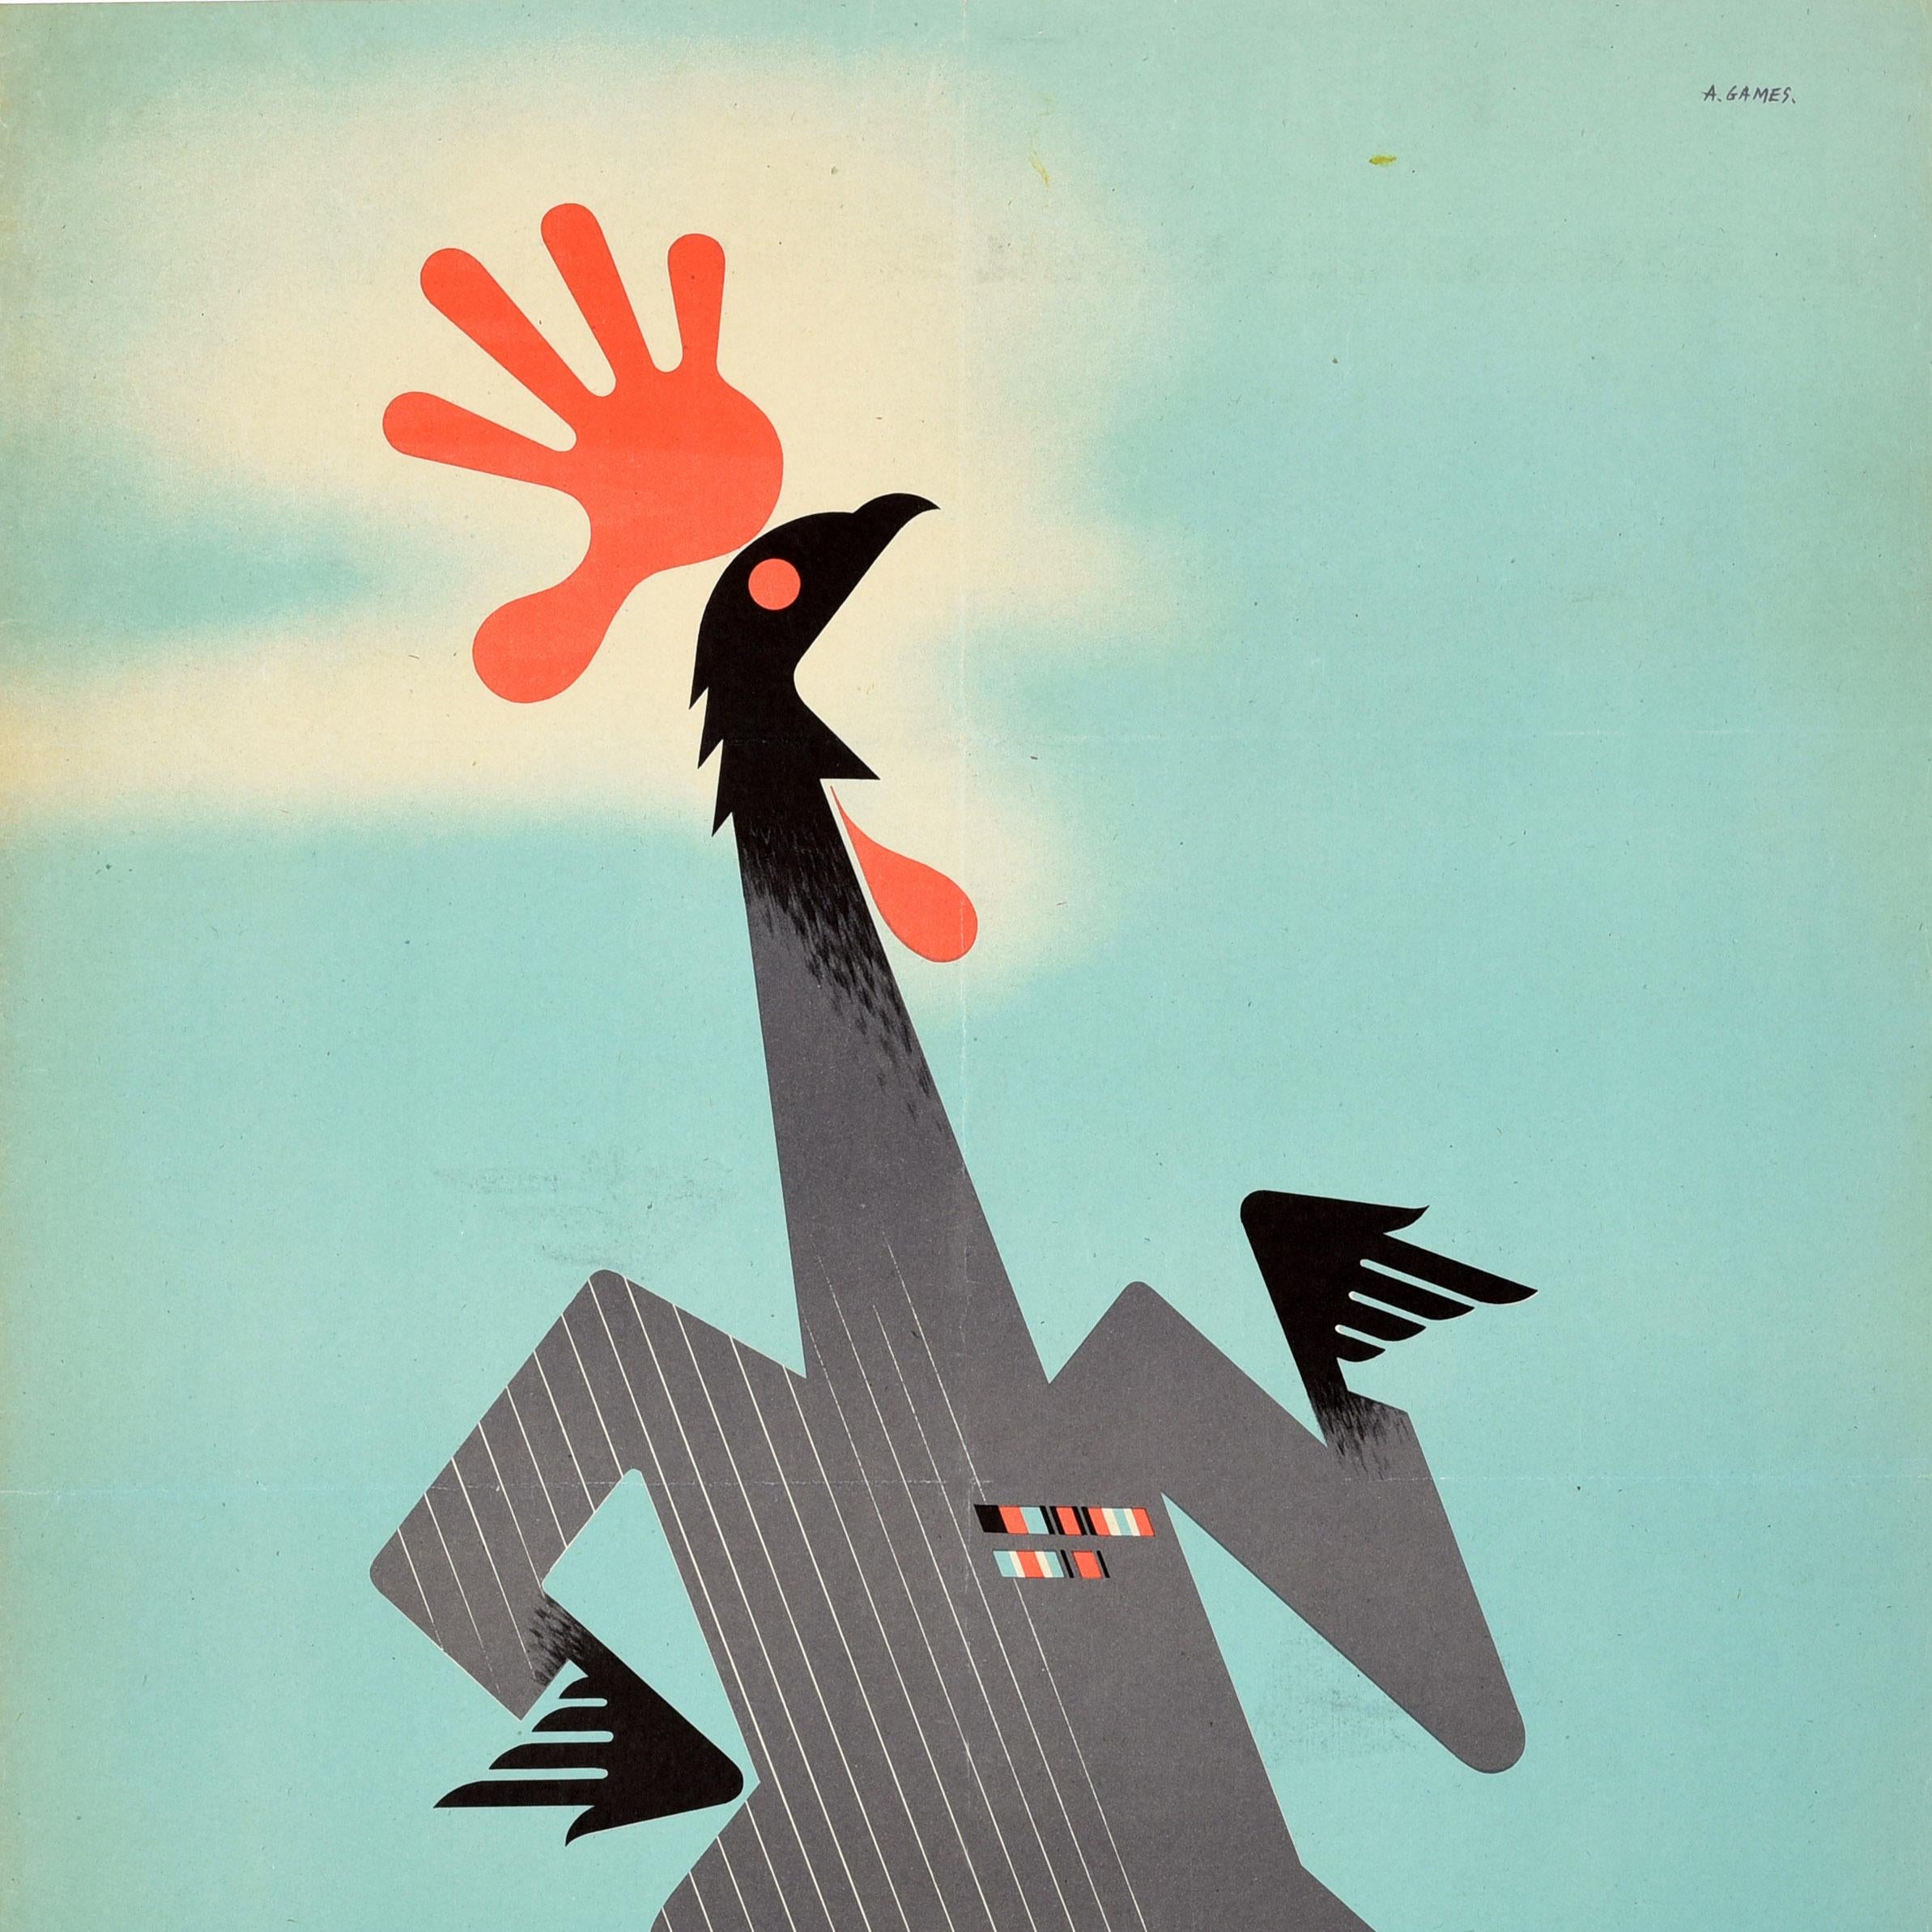 Original Vintage WWII Poster When You Go Out Don't Crow Cockerel Abram Games Art For Sale 1